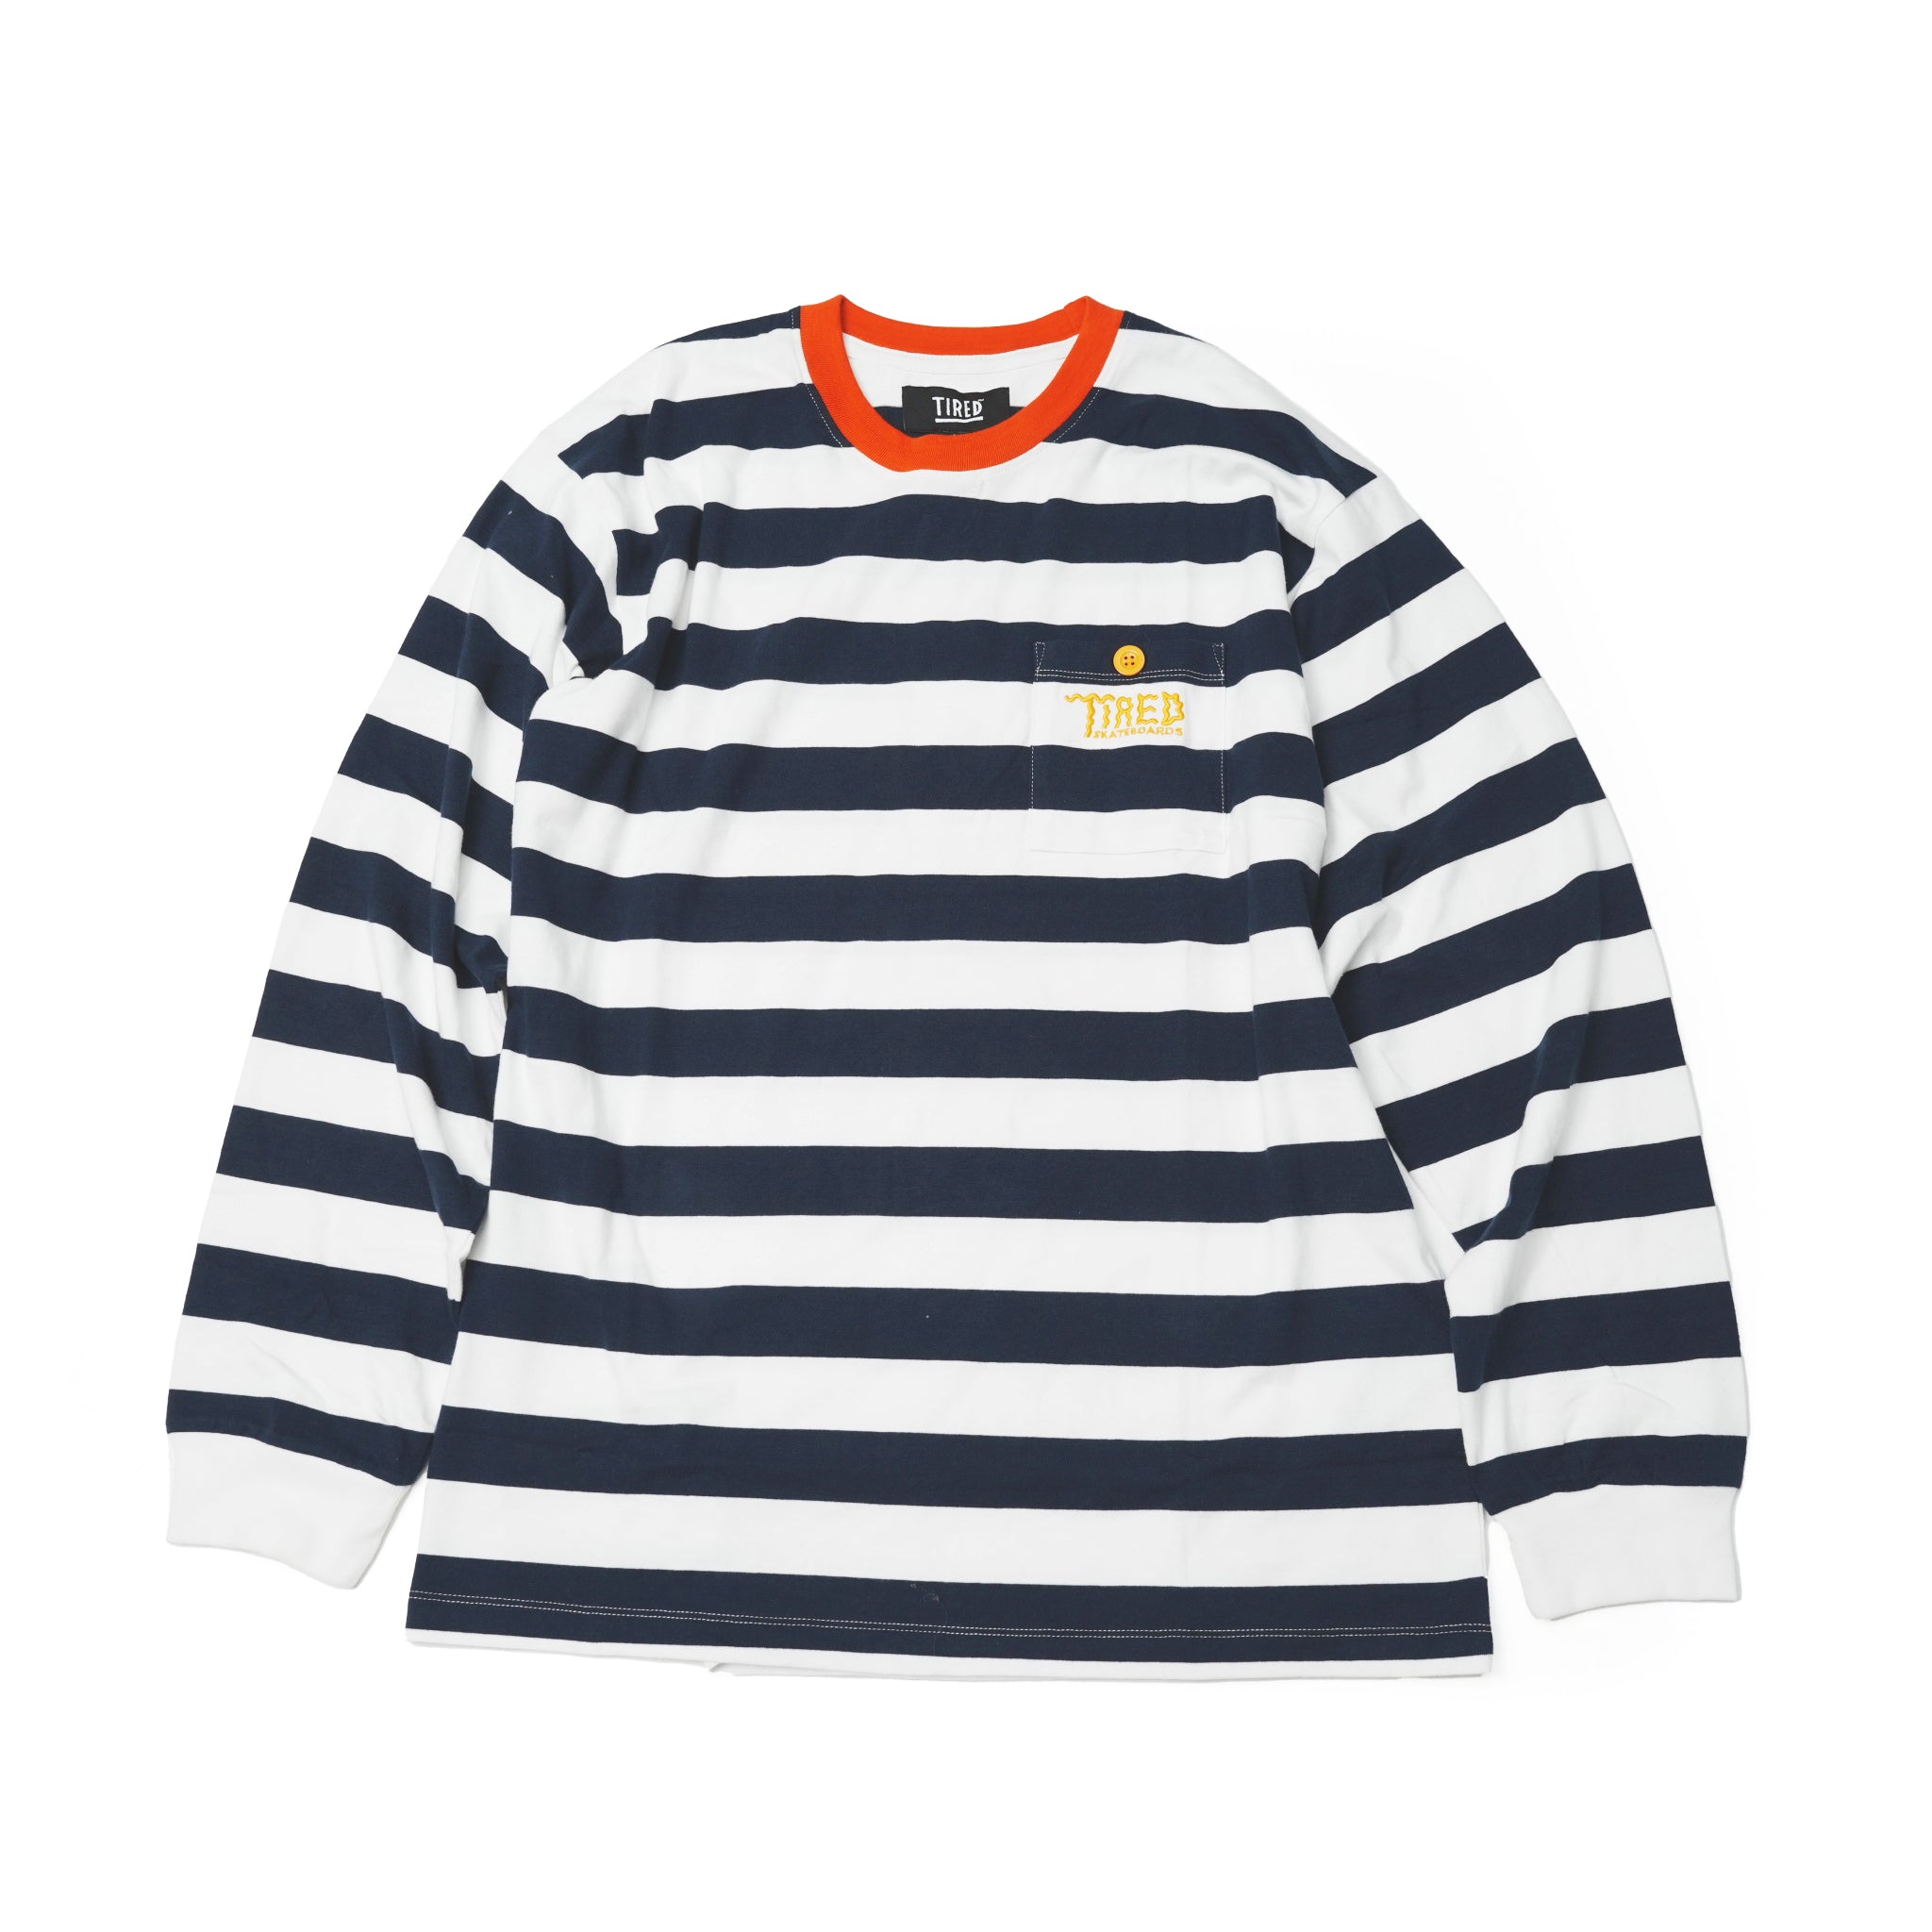 No:TS00313 | Name:SQUIGGLY LOGO STRIPED POCKET LS | Color:Red/Navy【TIRED_タイレッド】